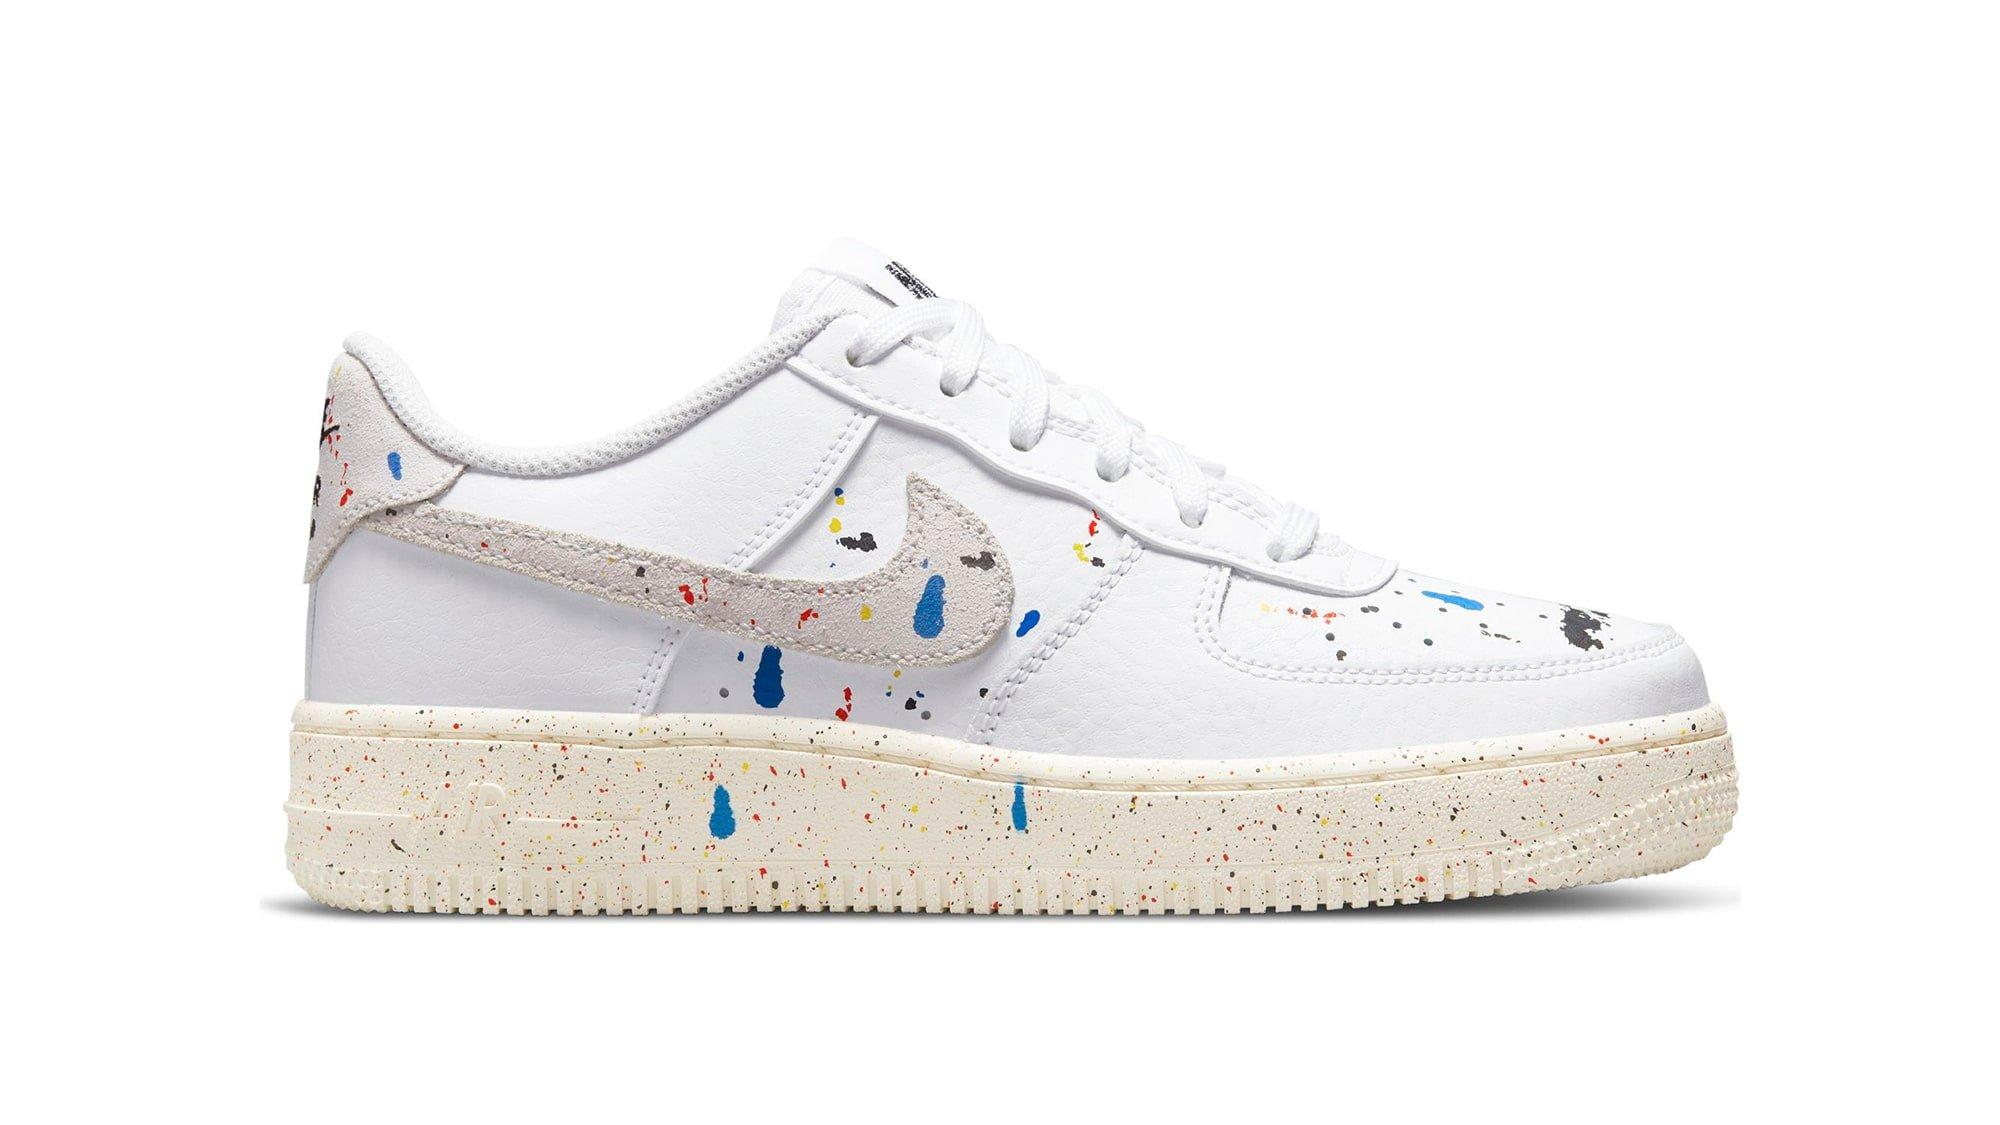 Sneakers Release- Kids’ Nike Force 1 “White/Sail